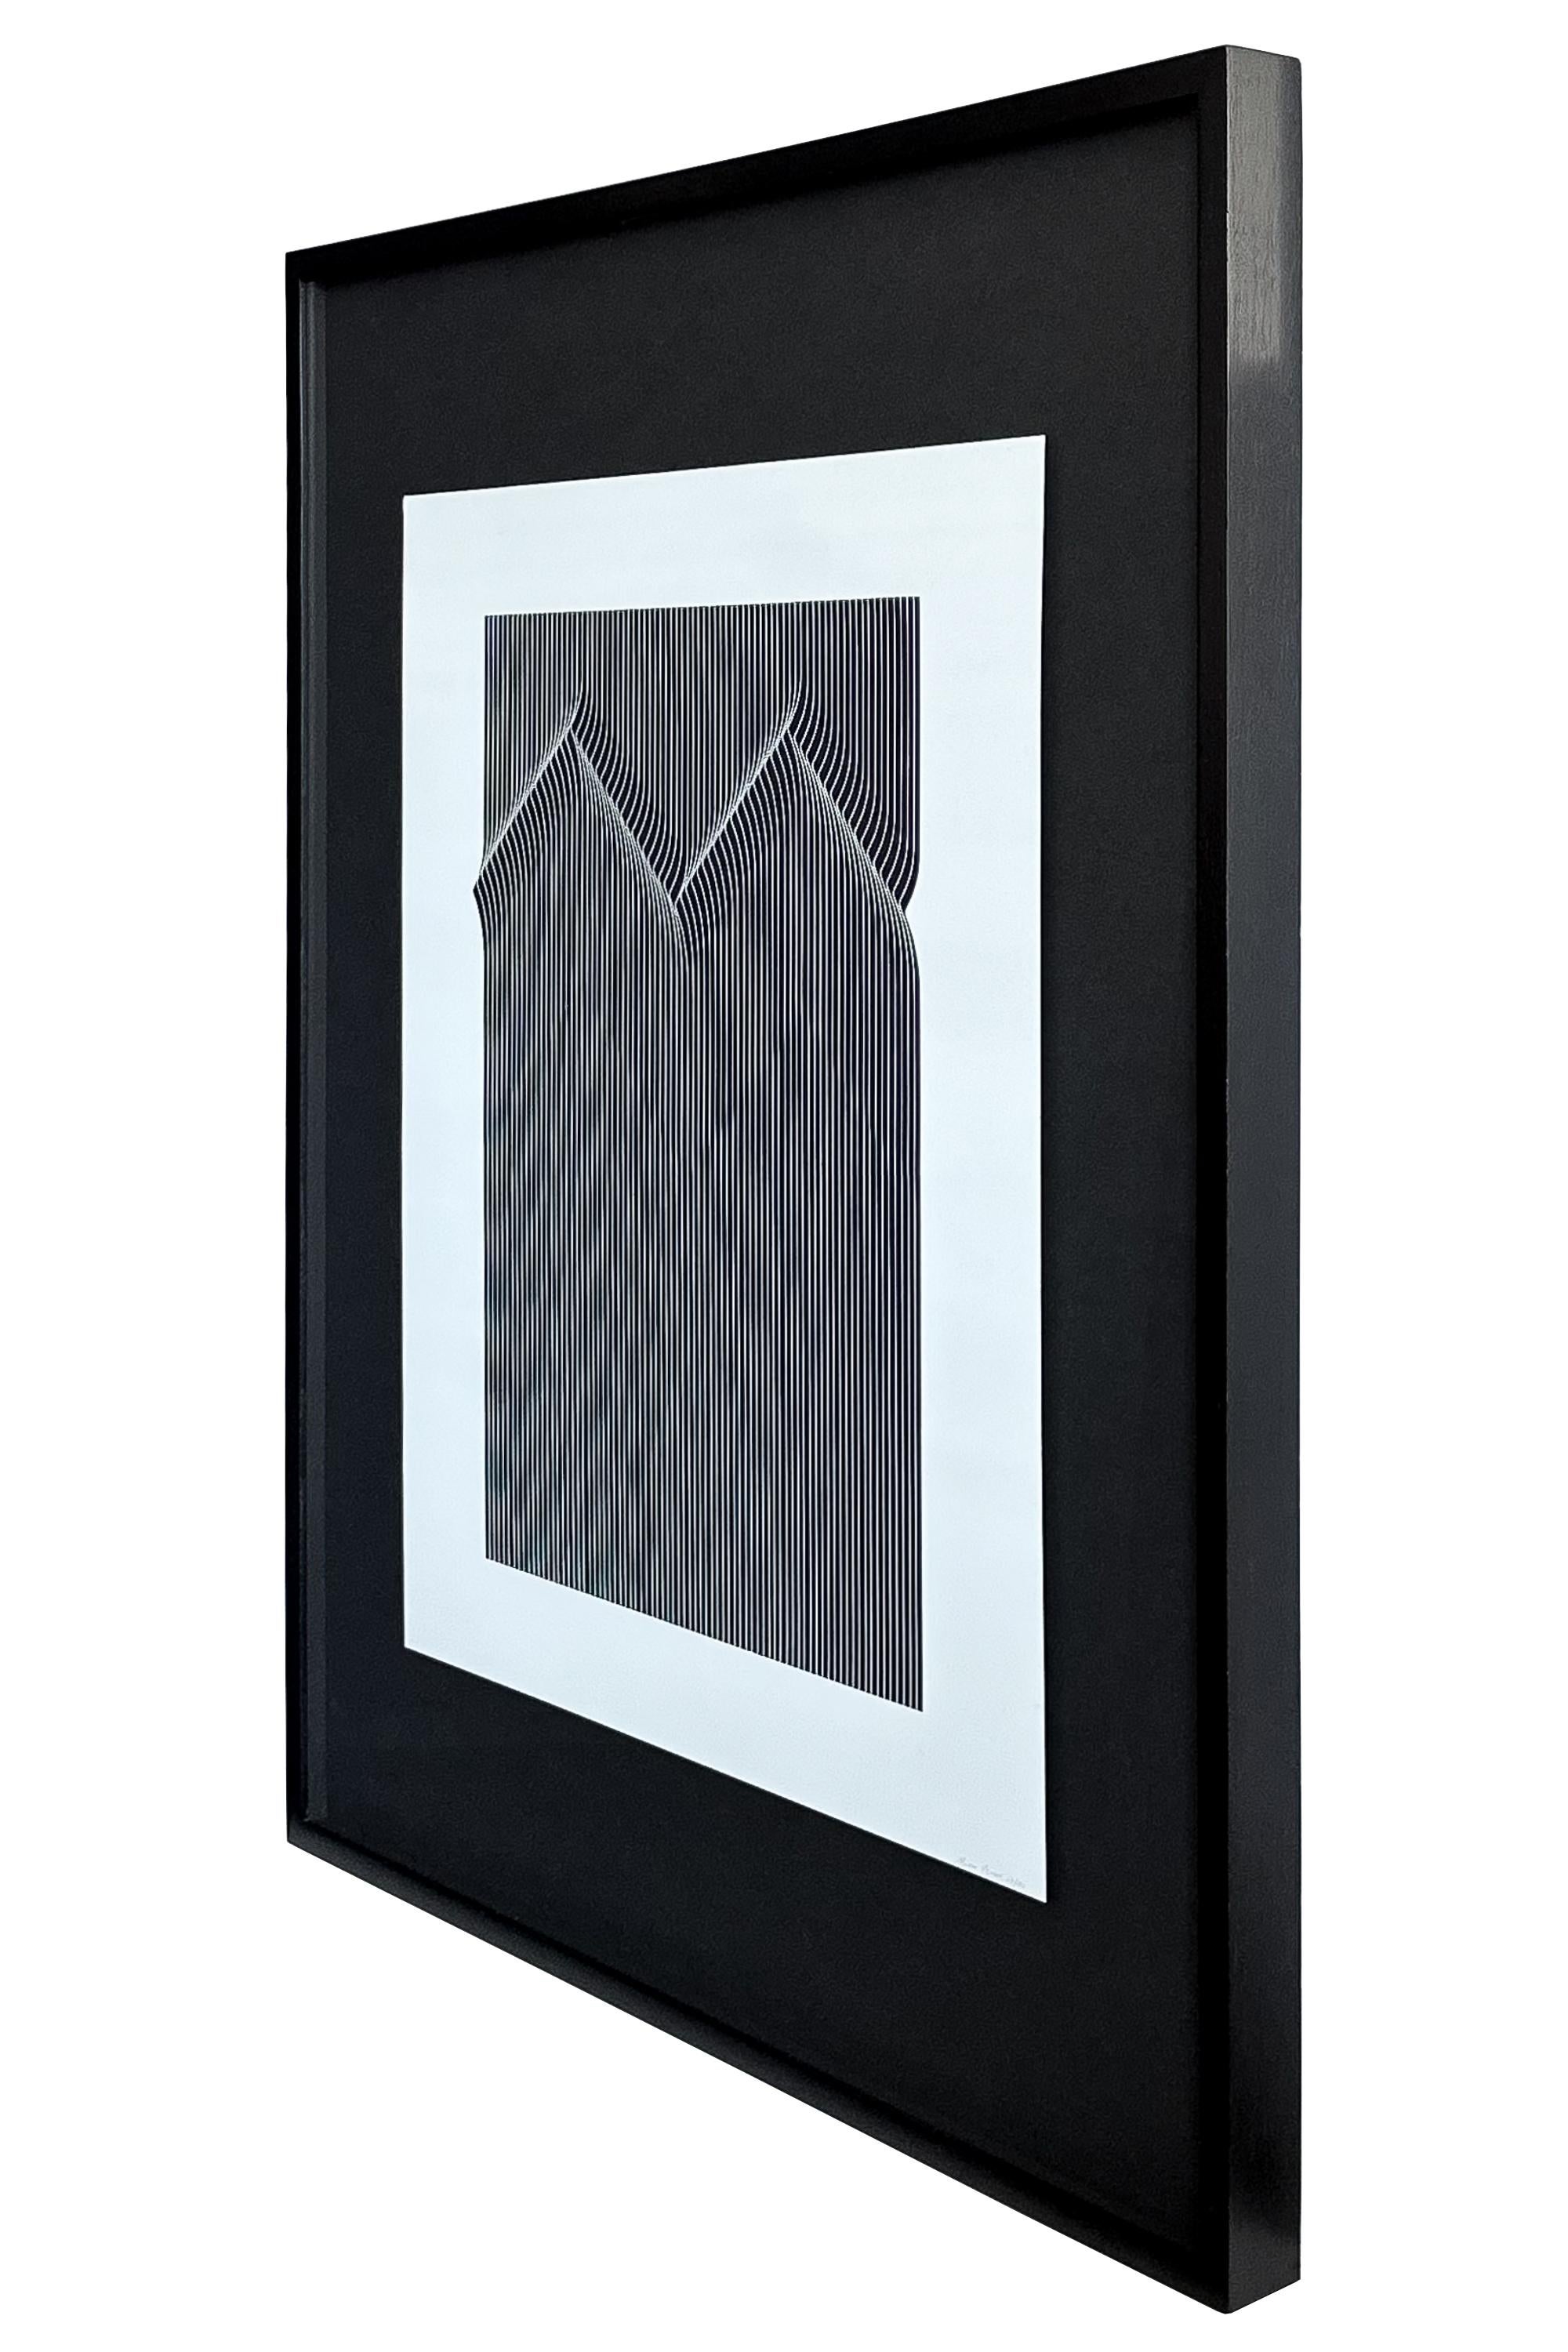 Experience the mesmerizing magic of op art with “Grille Noire”, a captivating  abstract creation by the celebrated French artist Marc Pessin (1933-2022). Renowned for his prowess as an engraver and illustrator, Pessin’s works are a testament to his